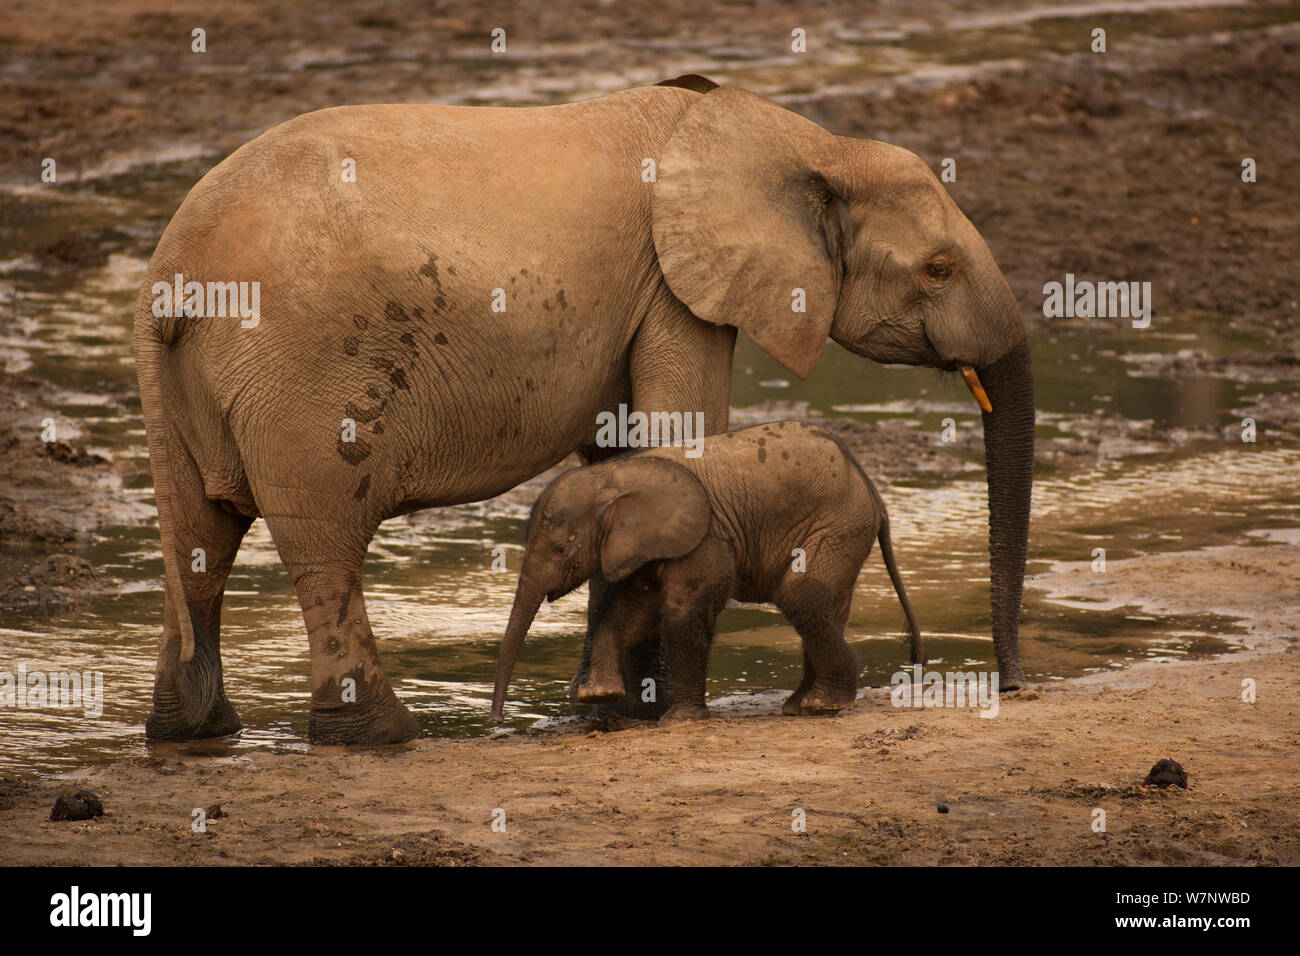 African Forest elephant (Loxodonta africana cyclotis) mother and calf visiting Dzanga Bai to feed on mineral-rich sediments, Dzanga-Ndoki National Park, Central African Republic Stock Photo